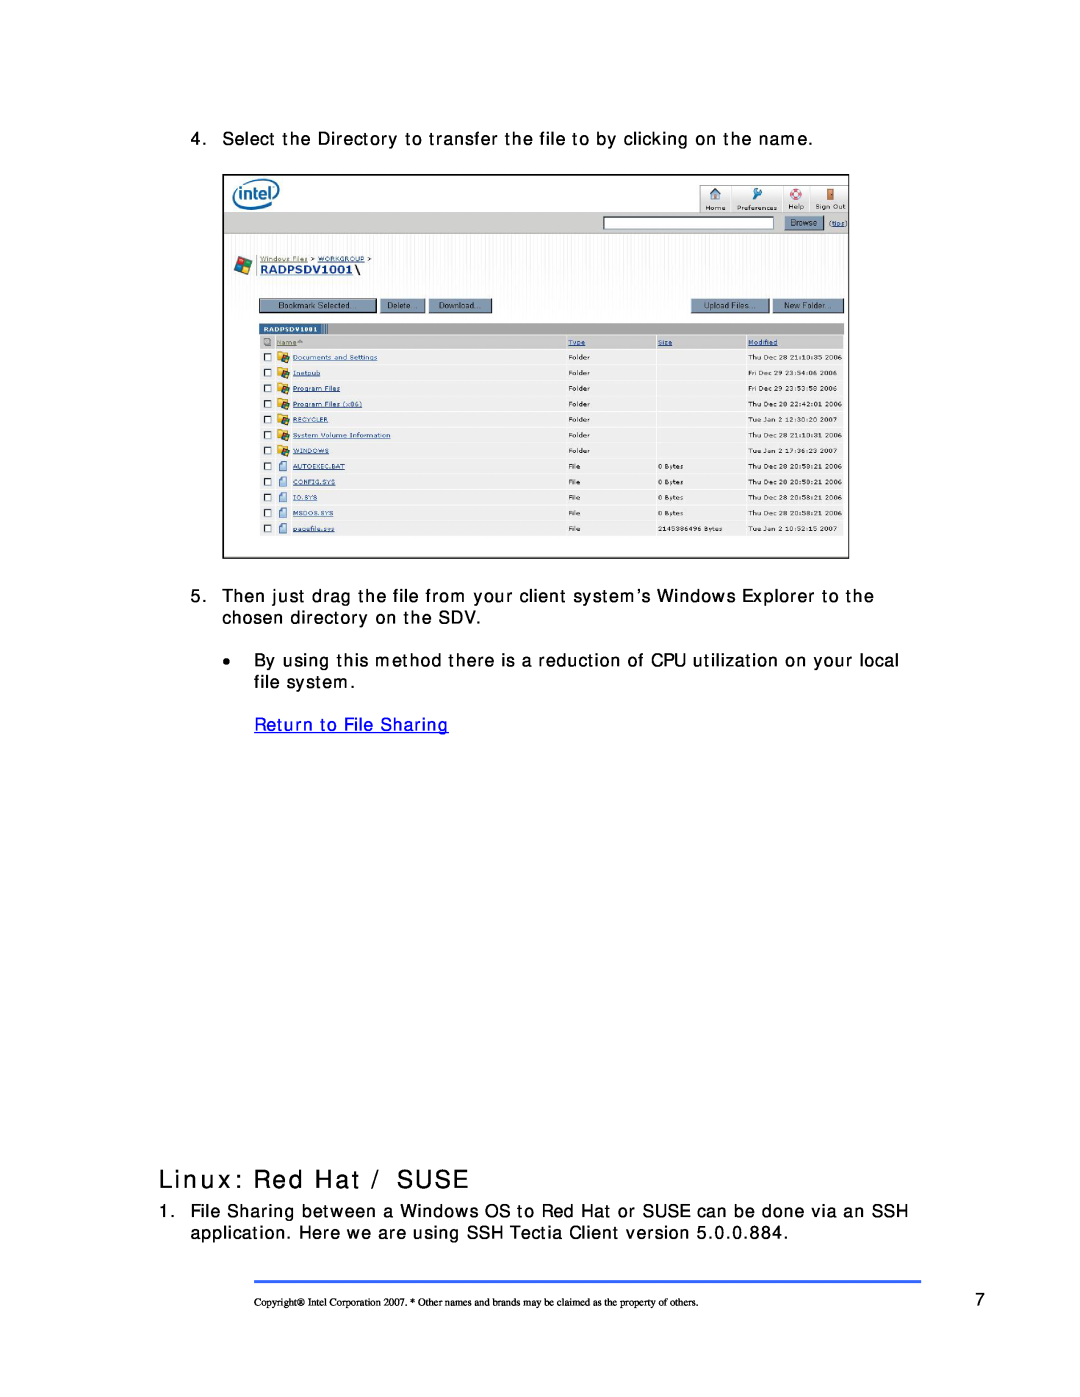 Intel 120000 manual Linux Red Hat / SUSE, Return to File Sharing 